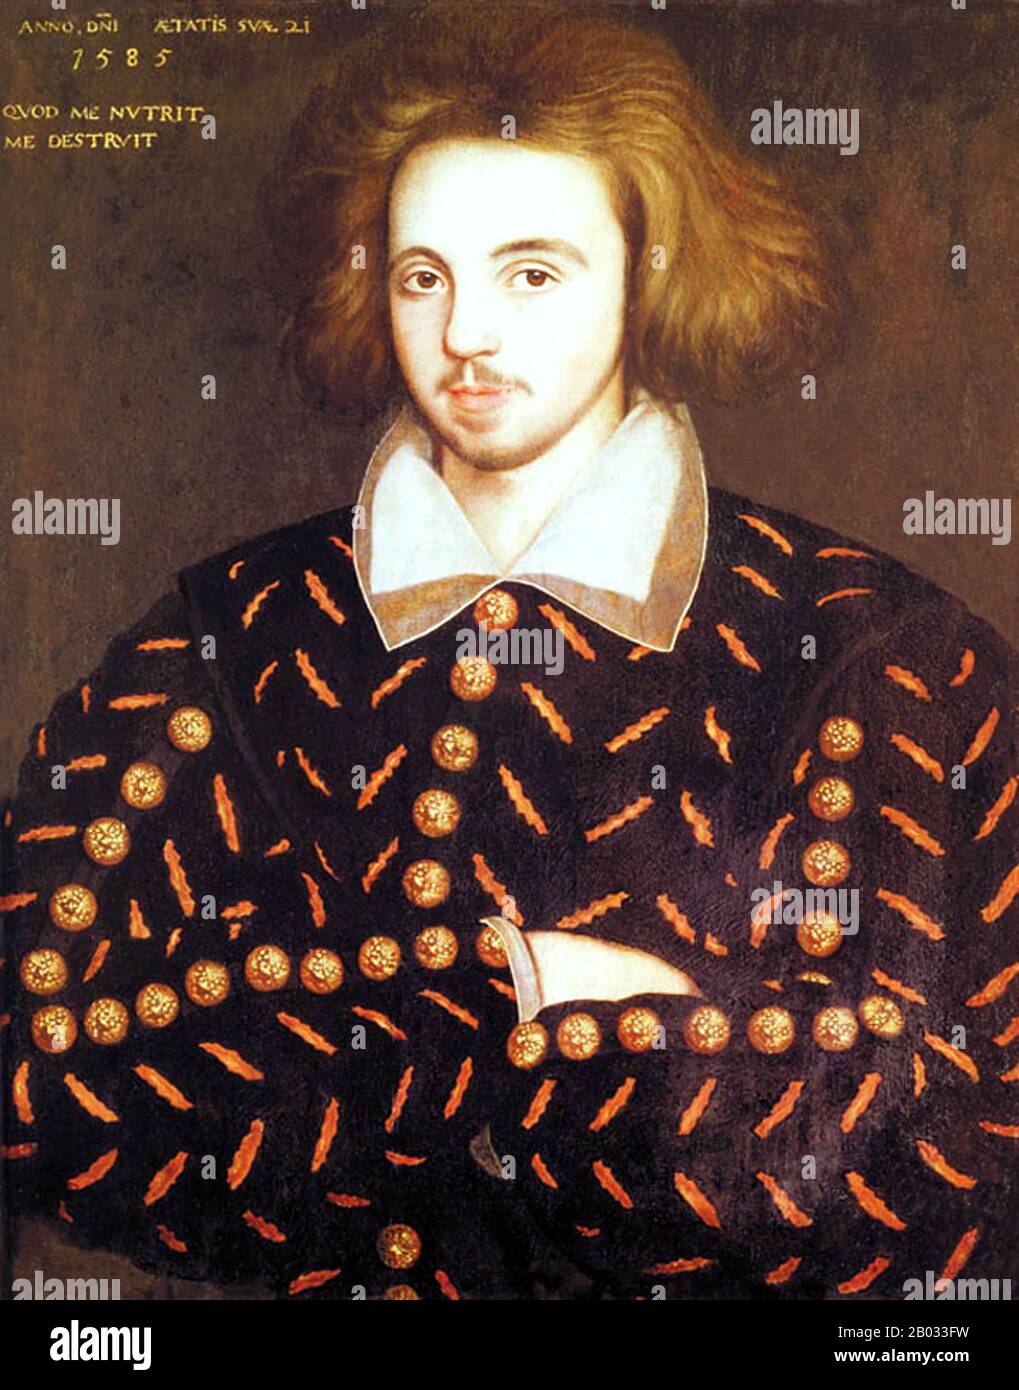 Christopher Marlowe, also known as Kit Marlowe (26 February 1564 – 30 May 1593), was an English playwright, poet and translator of the Elizabethan era.  He greatly influenced William Shakespeare, who was born in the same year as Marlowe and who rose to become the pre-eminent Elizabethan playwright after Marlowe's mysterious early death. Stock Photo